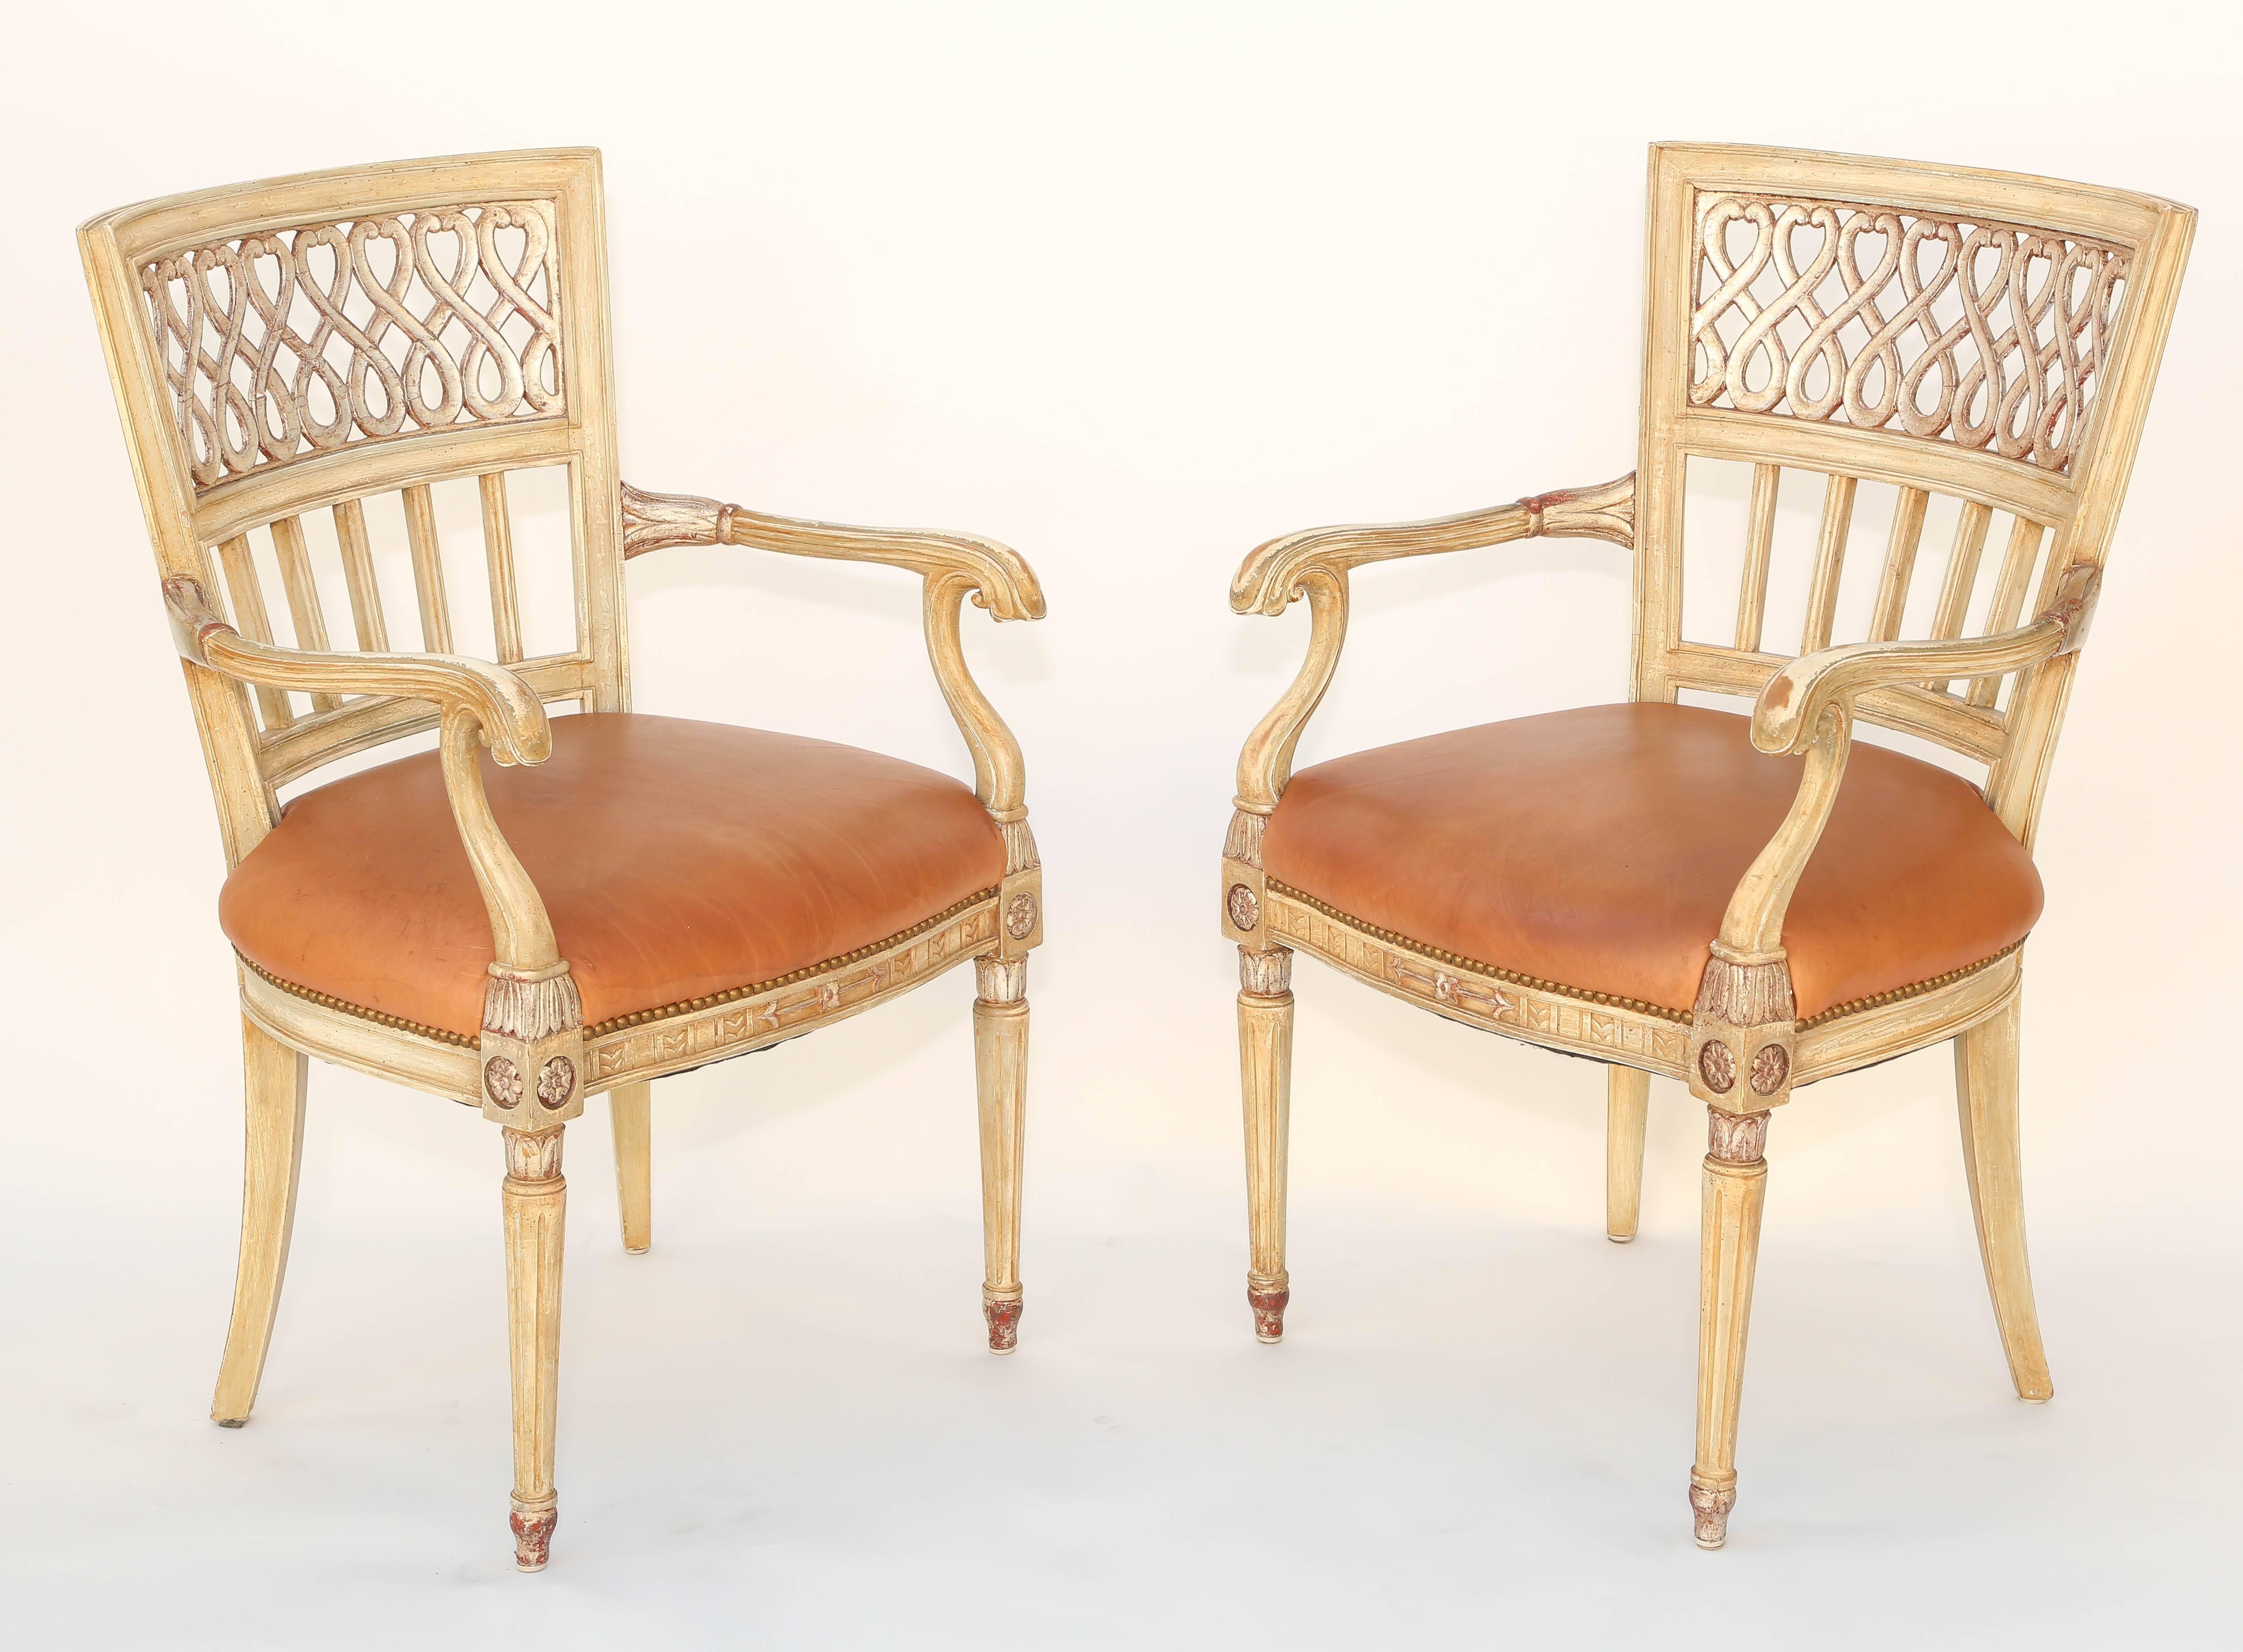 Pair of armchairs, painted and parcel silvergilt finish, having a channeled square, tapering back, inset with scrolling Meander, out swept arm on S-scroll terminals, crown seat in orange leather with nailheads, raised on round, fluted, tapering